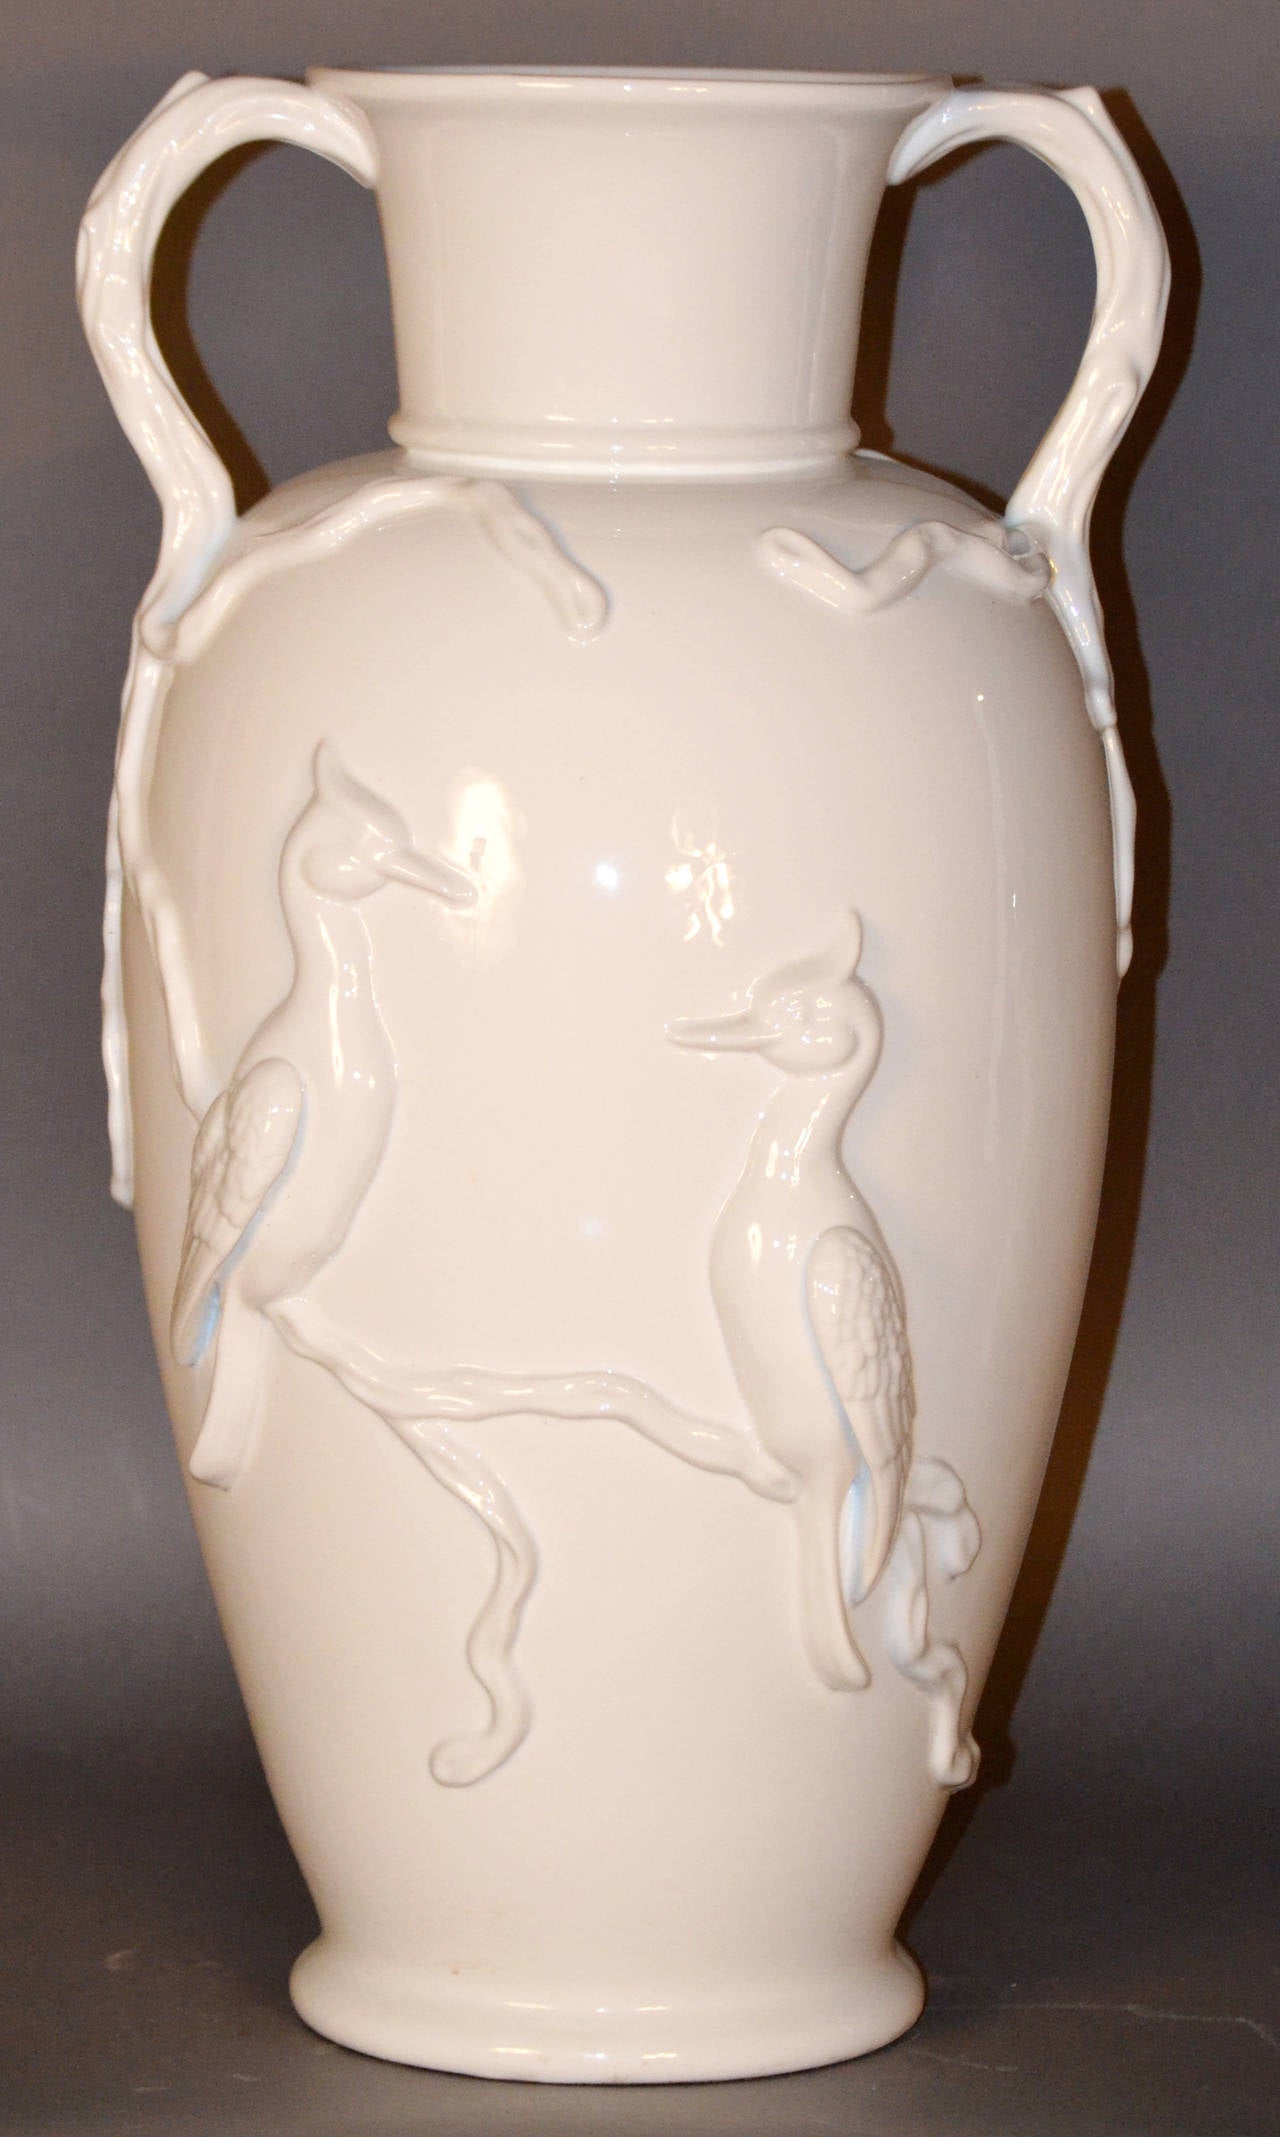 Monumental Elgin Paris blanc de chine handled vase with relief in Asian birds and branches.